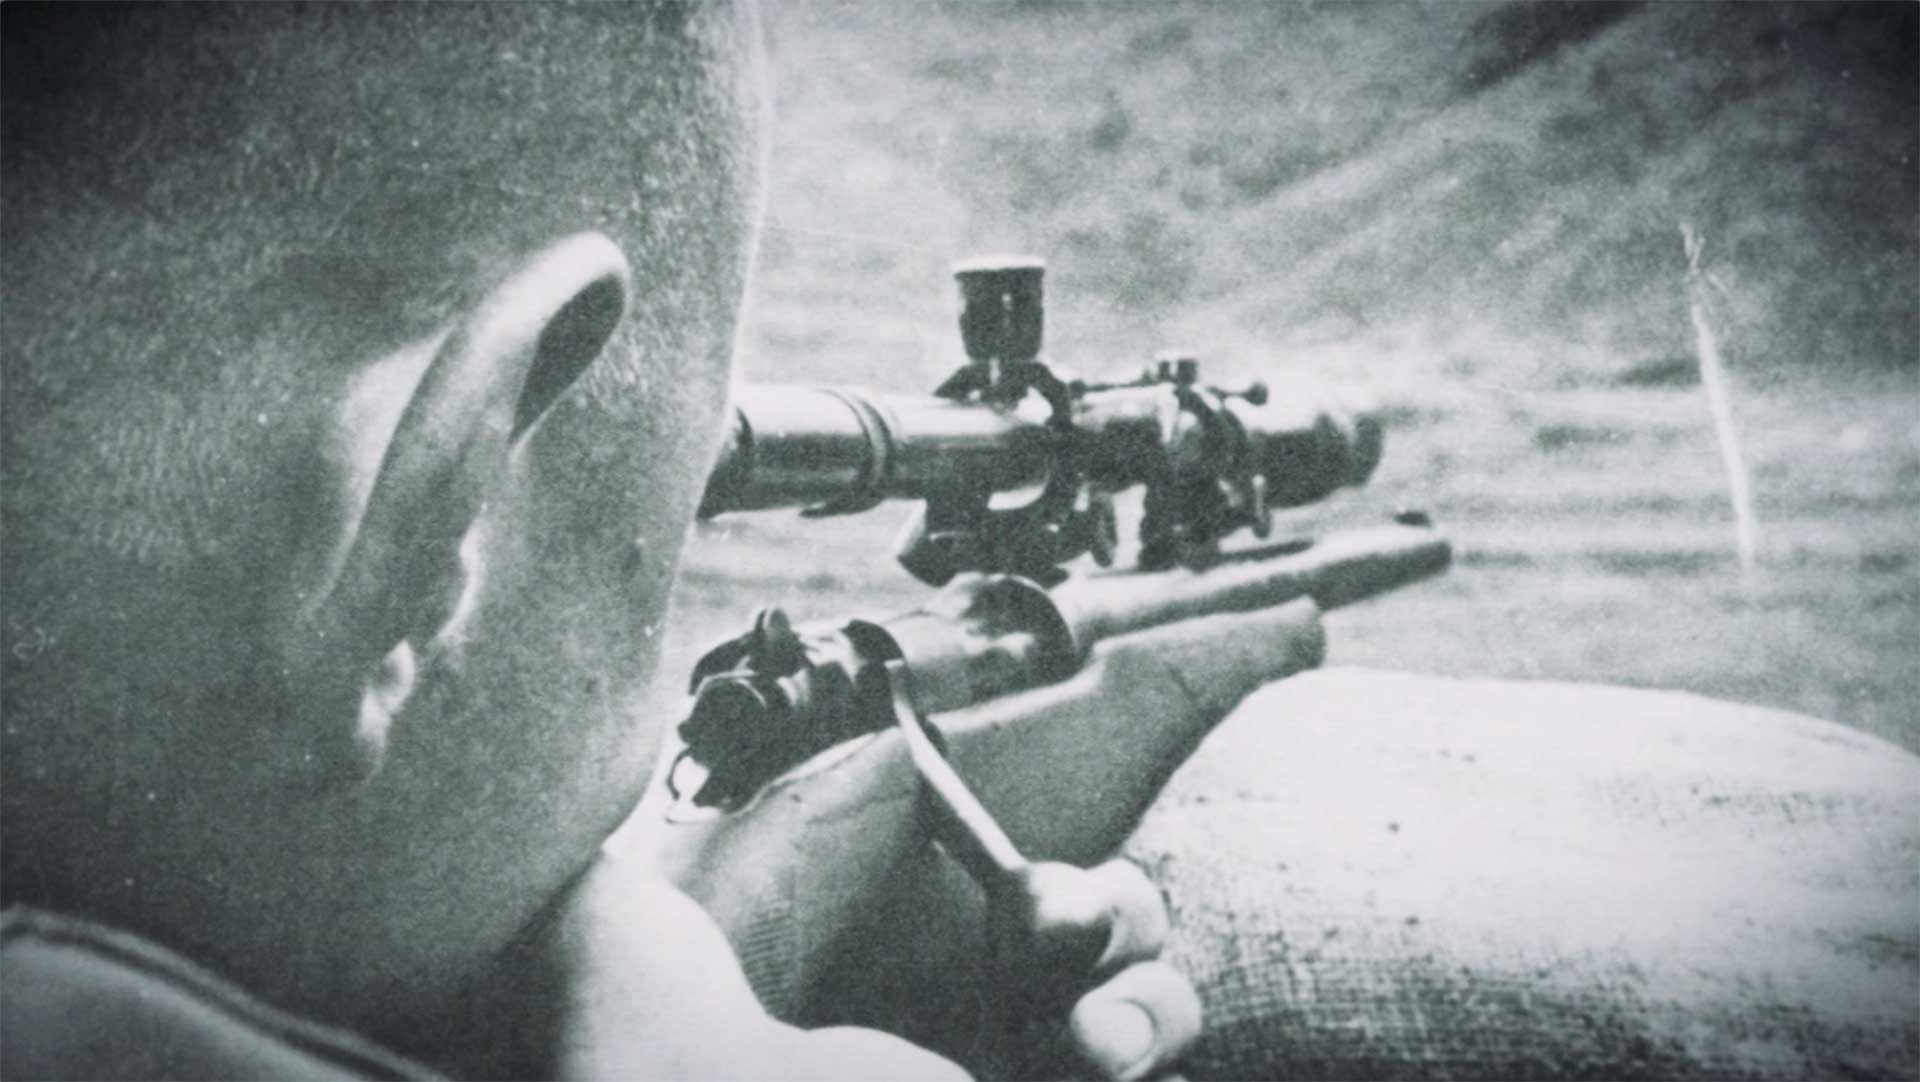 A Vietnam-era sniper in a black-and-white photo aims a scoped rifle into an open valley.